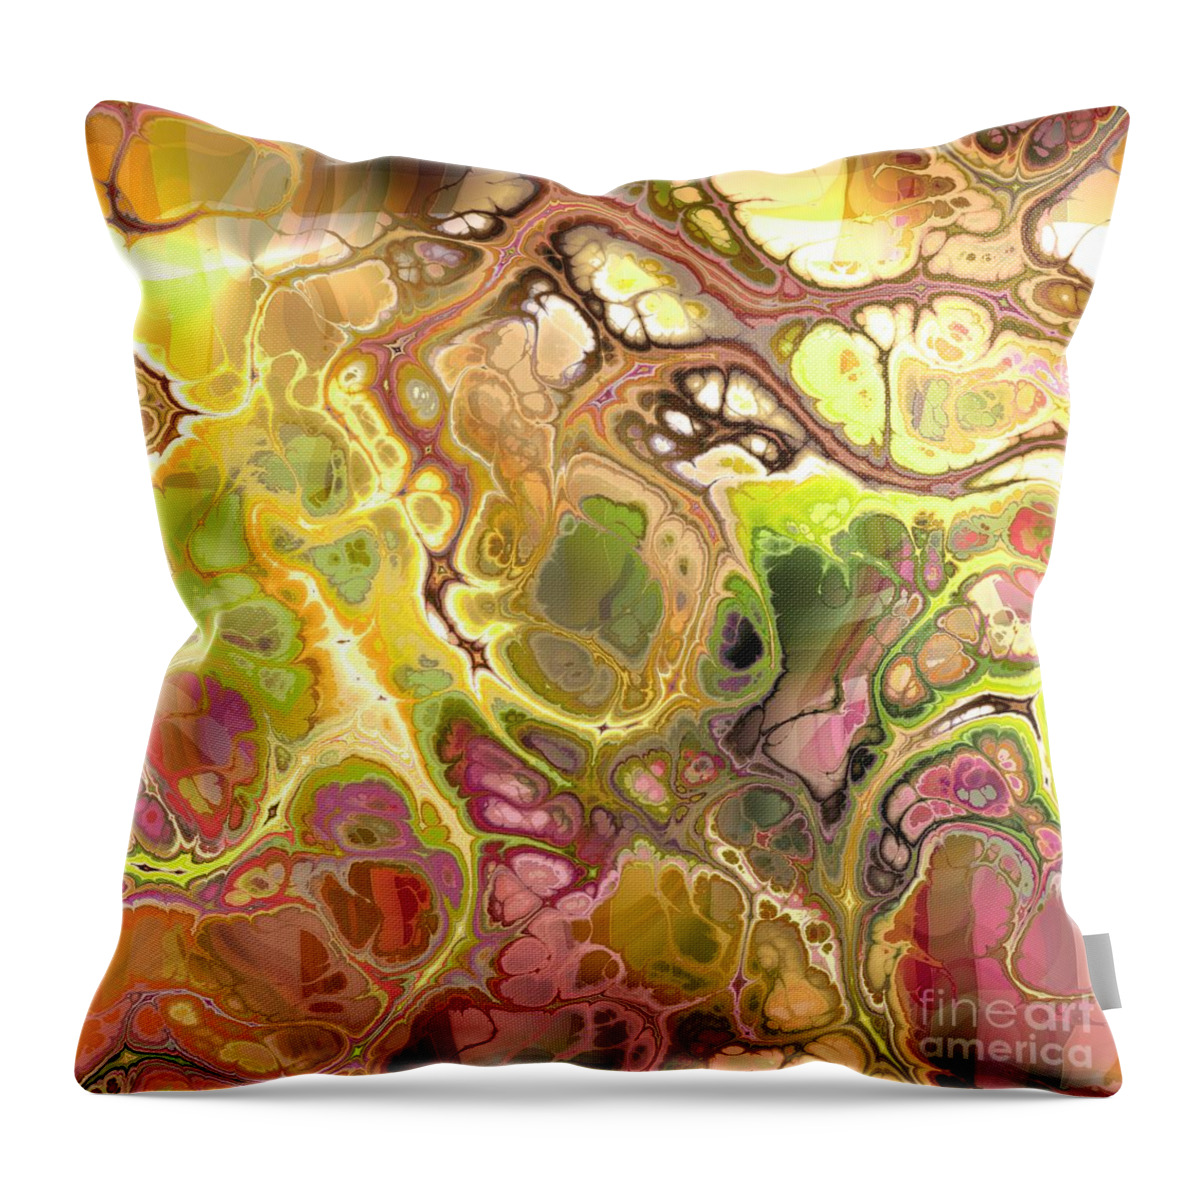 Colorful Throw Pillow featuring the digital art Suroto - Funky Artistic Colorful Abstract Marble Fluid Digital Art by Sambel Pedes